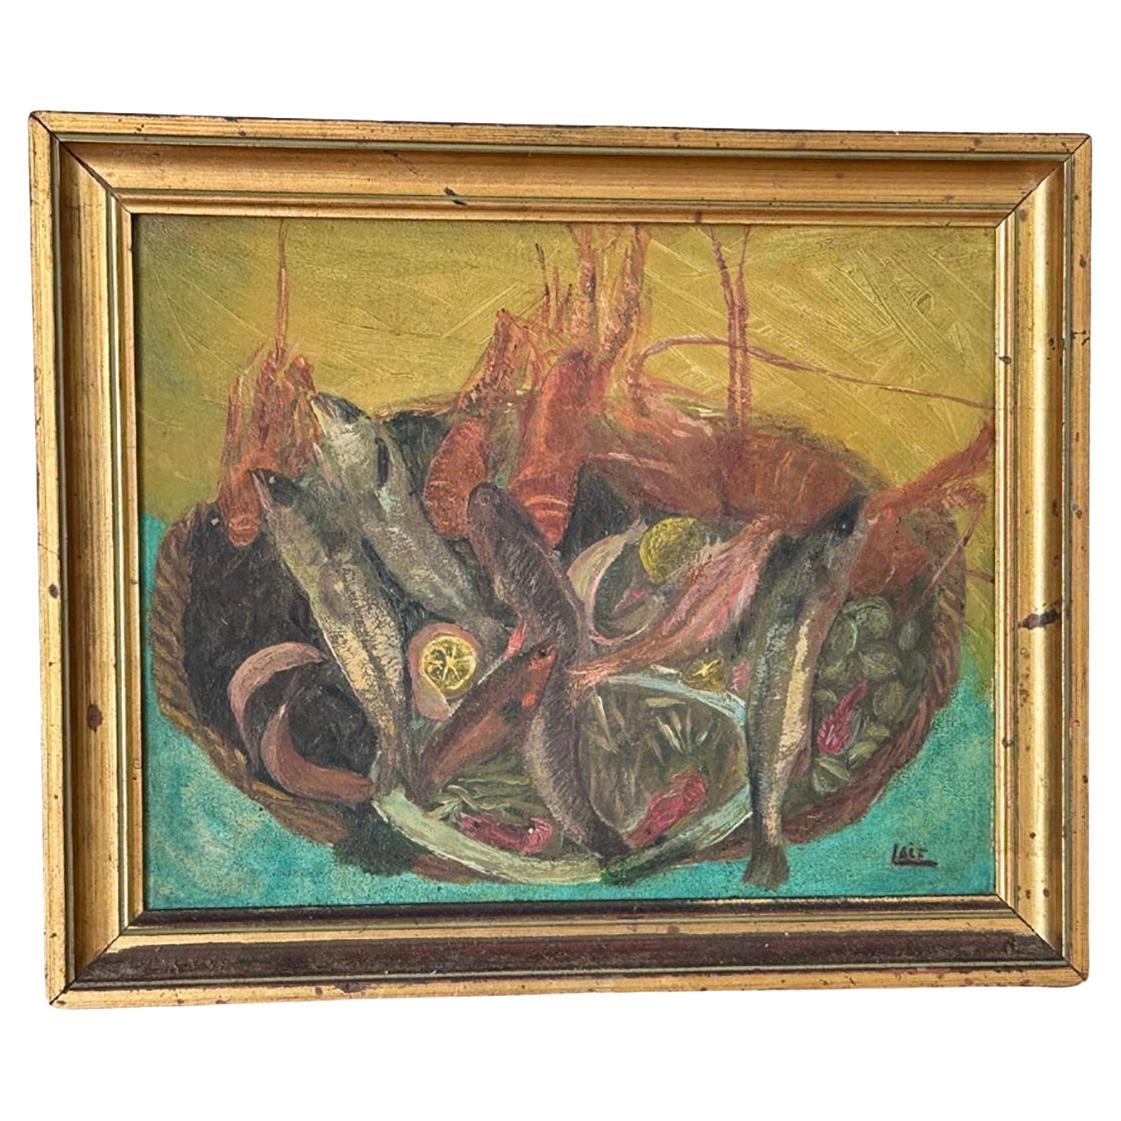 Original Oil Painting Representing Fishes Fance Early 20th Century For Sale